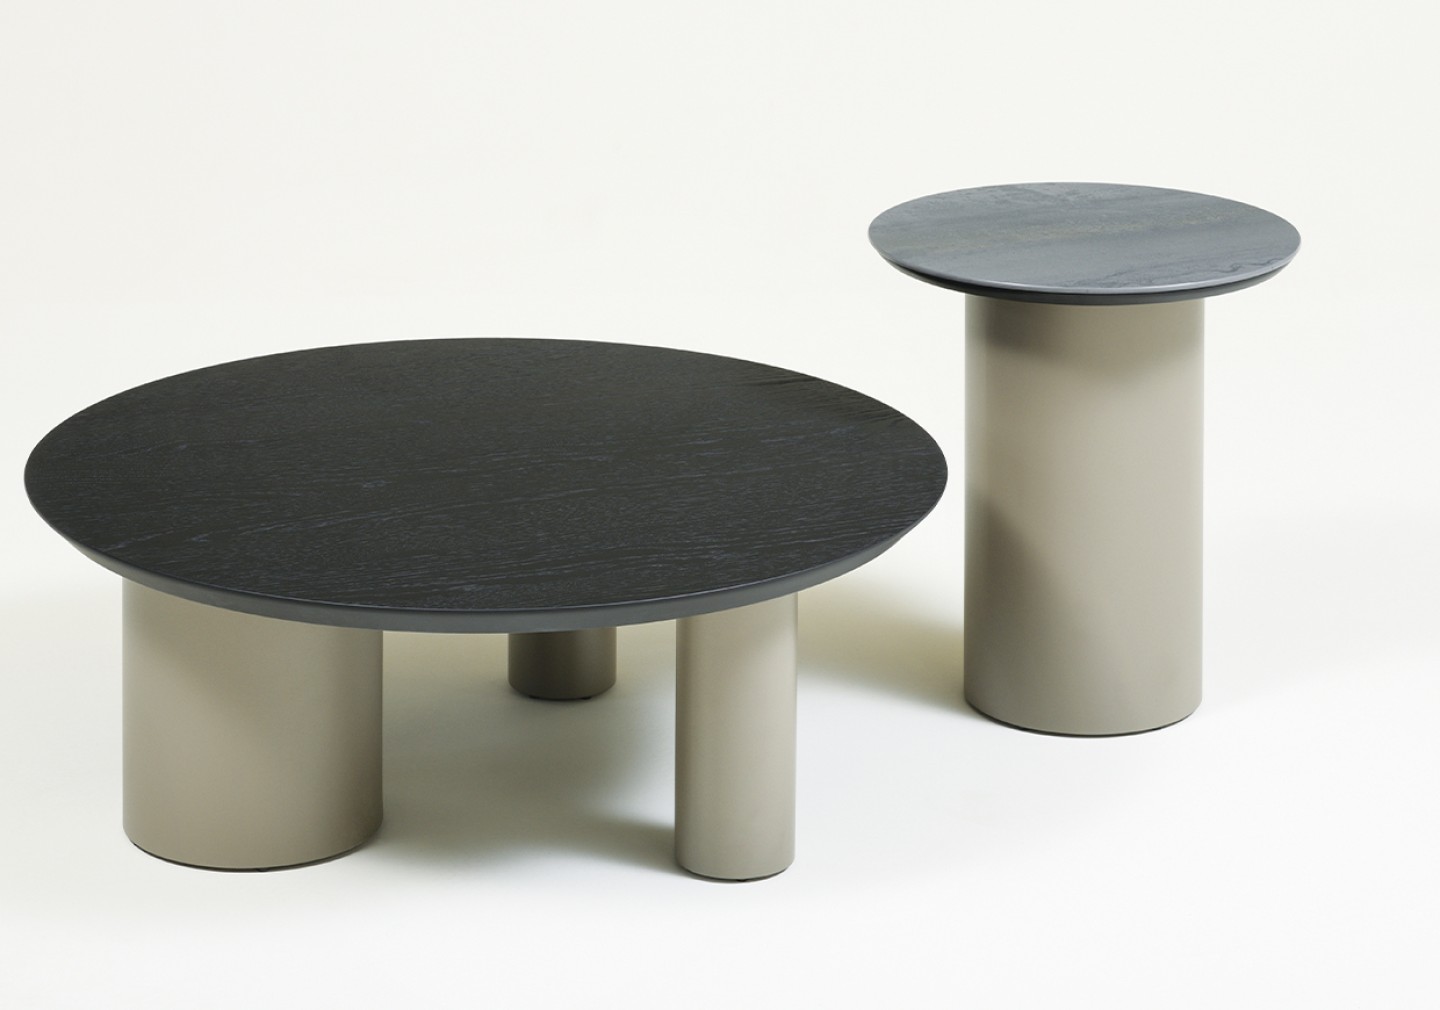 THE NORA ROUND COFFEE TABLE